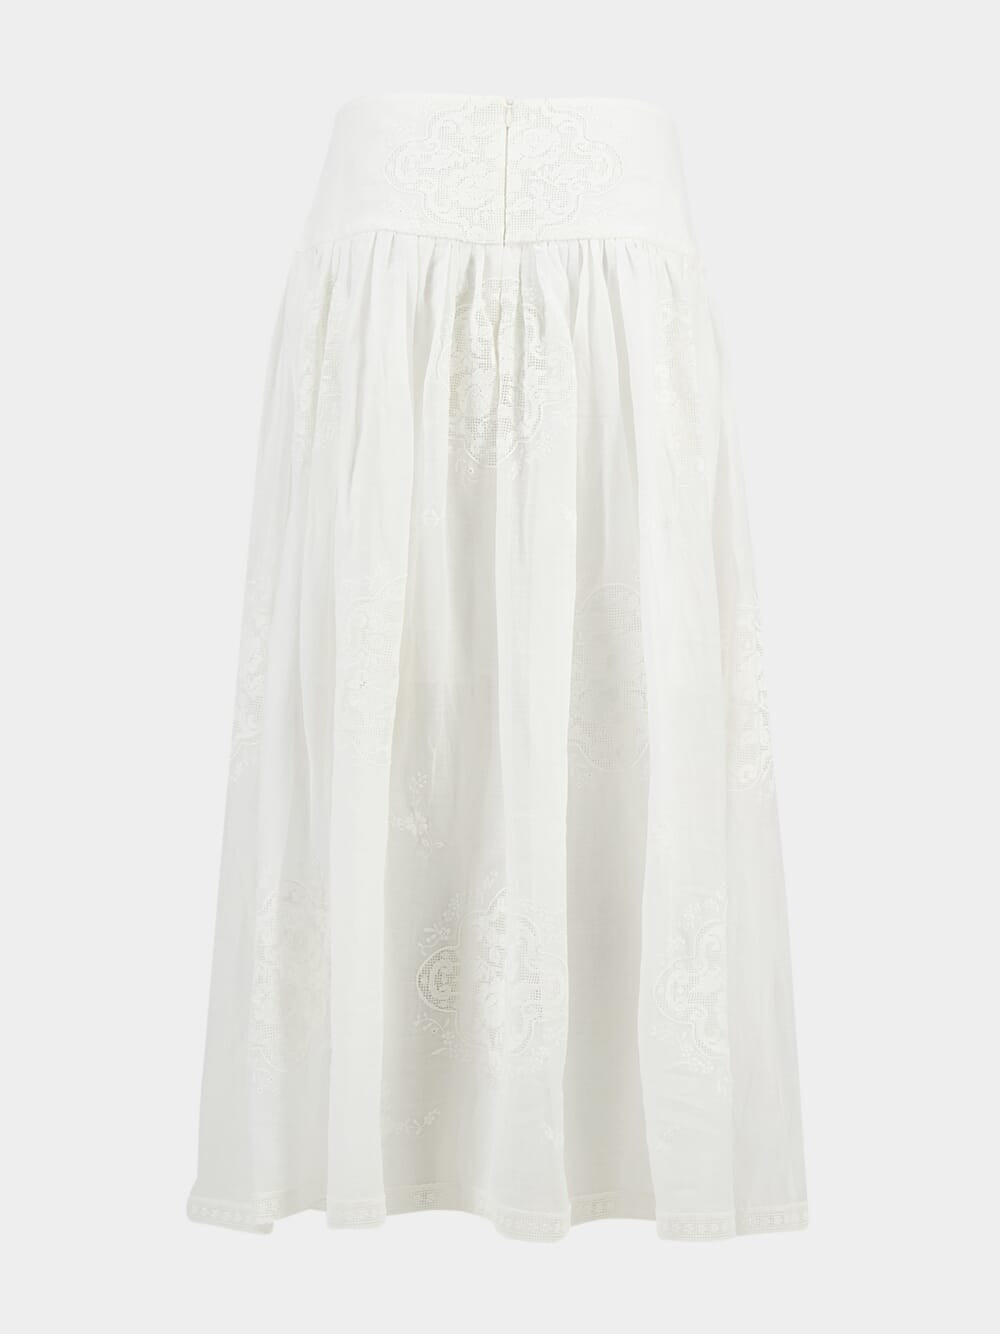 Alight Basque Embroidered White Maxi Skirt